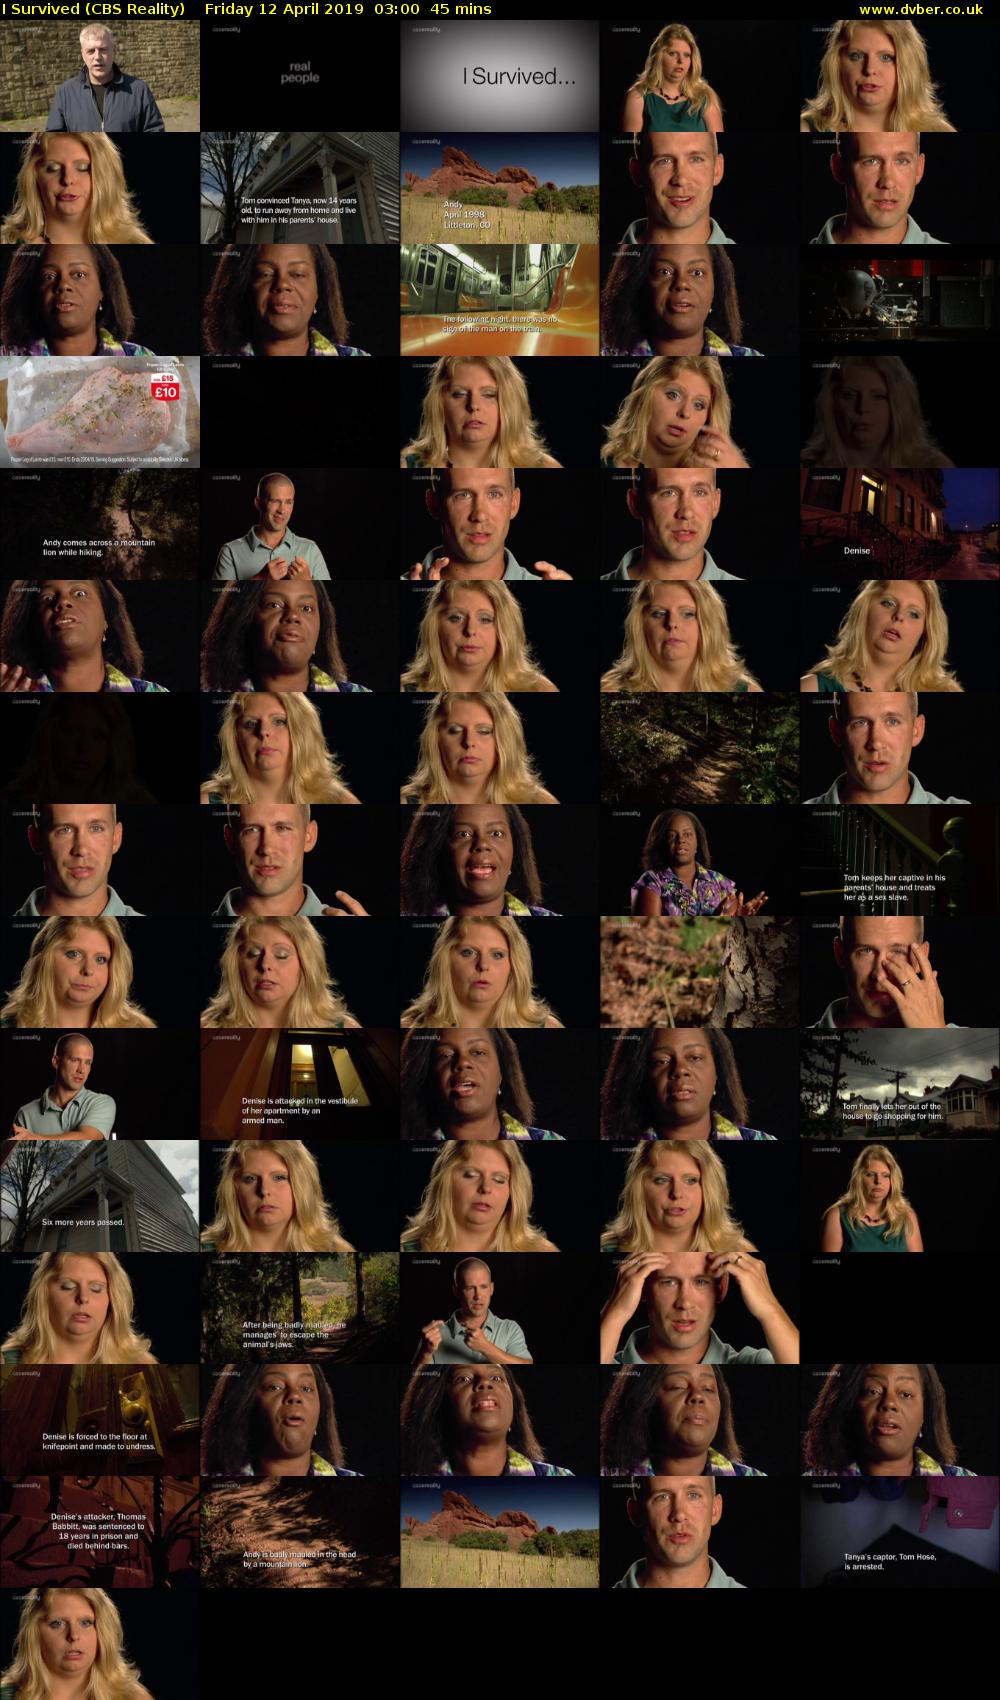 I Survived (CBS Reality) Friday 12 April 2019 03:00 - 03:45